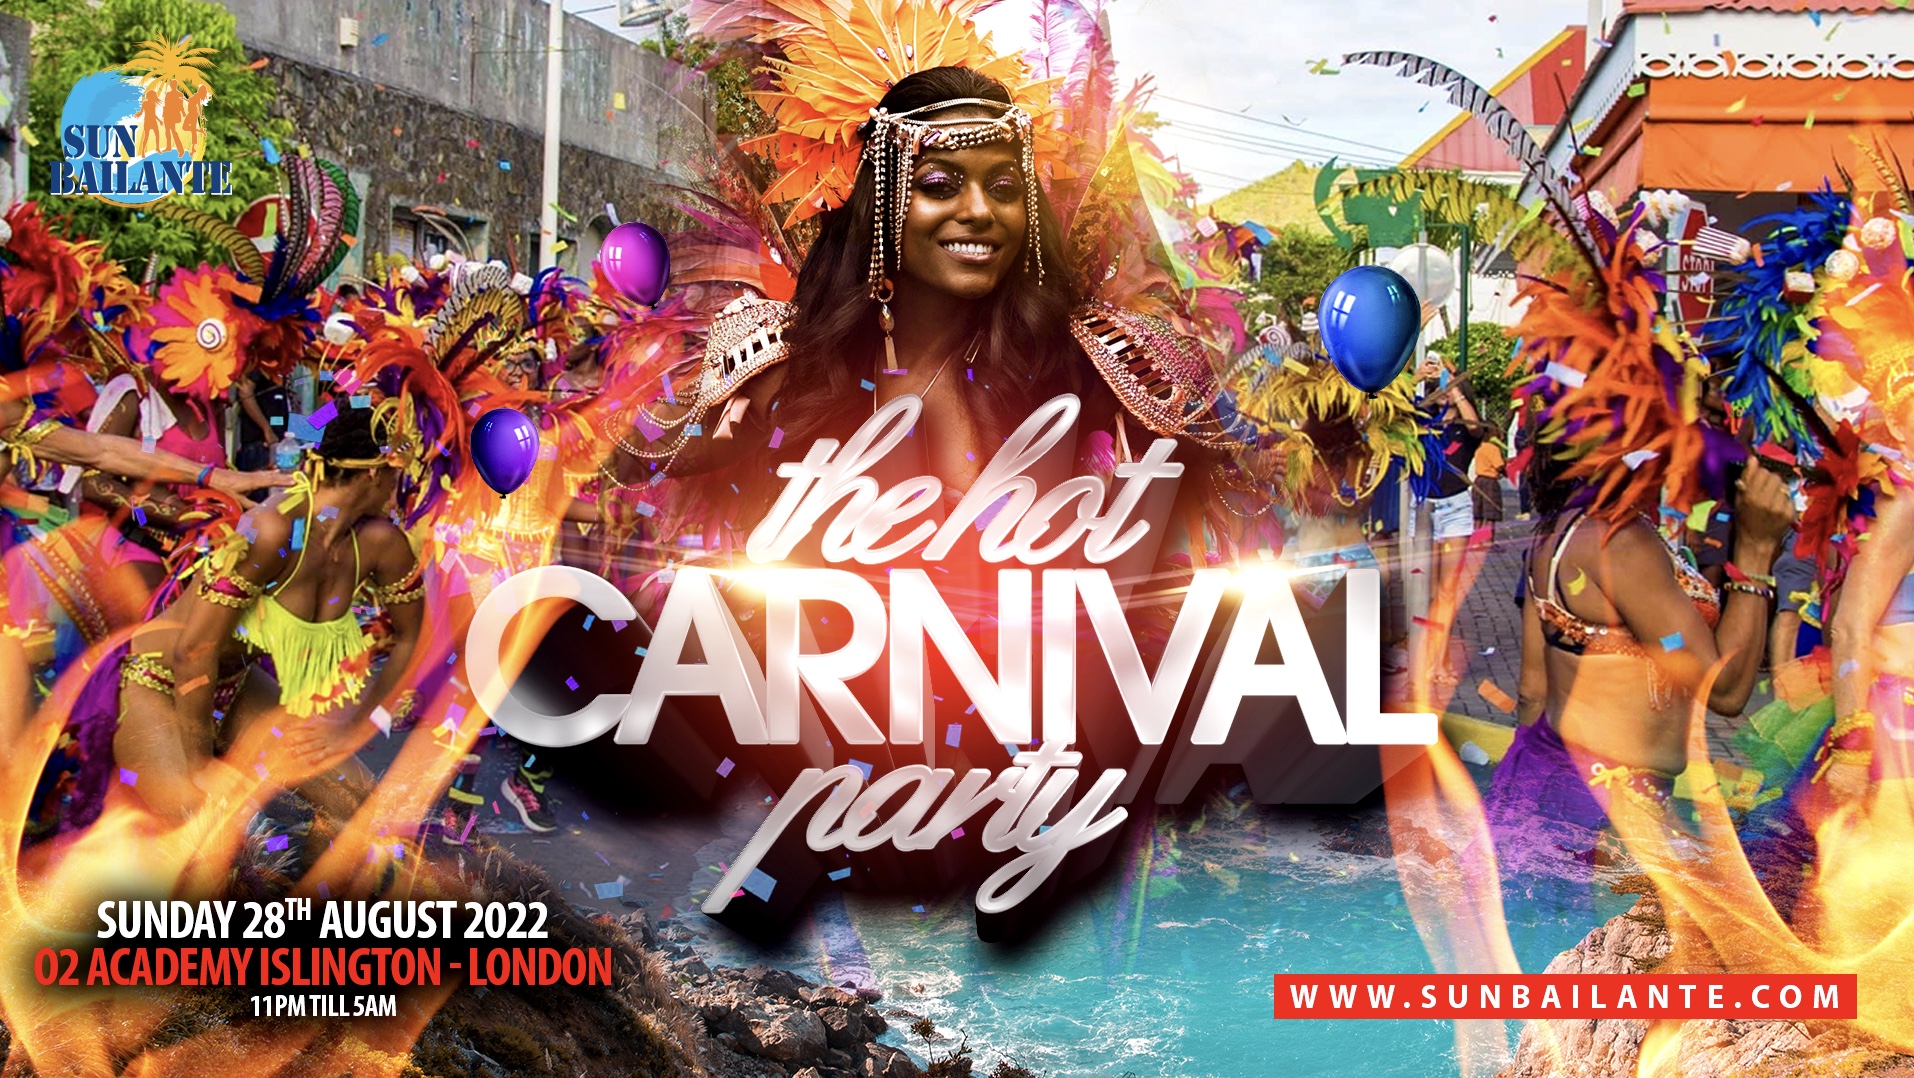 The Hot Carnival Party 2022 - Notting Hill Carnival 2022 Afterparty